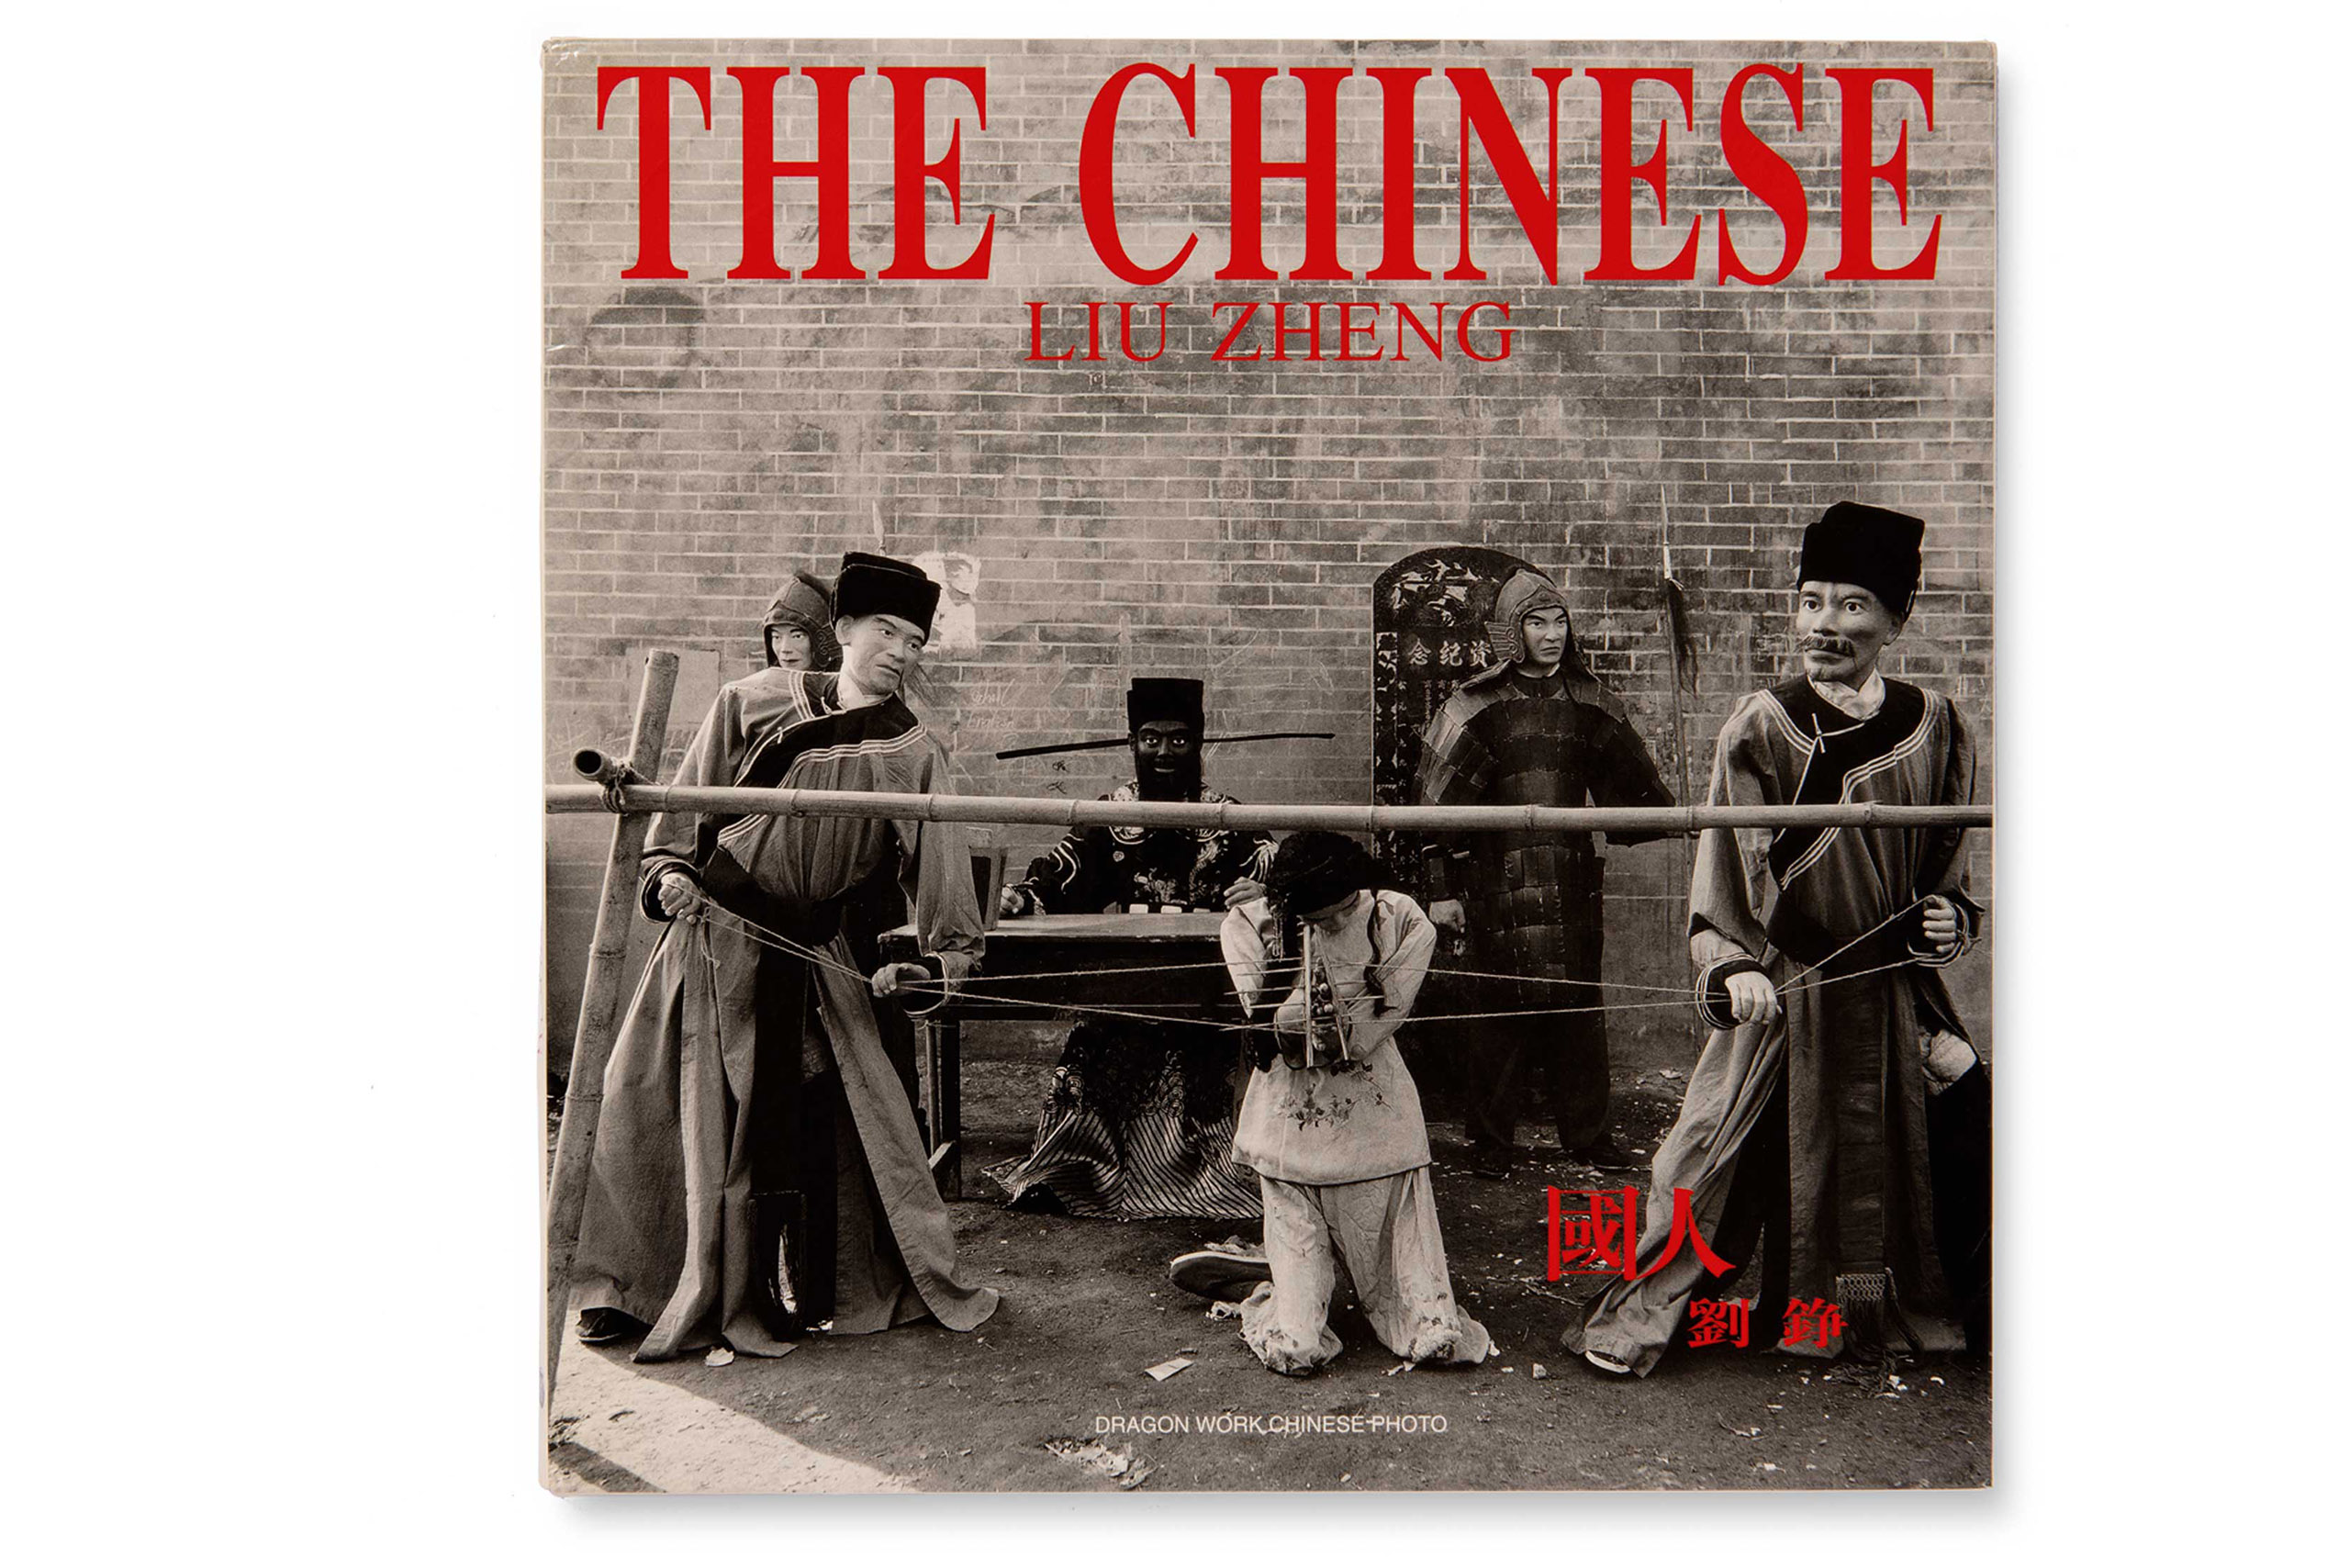 Cover of The Chinese by Liu Zheng. Beijing: Dragon Work Chinese Photo, 2000